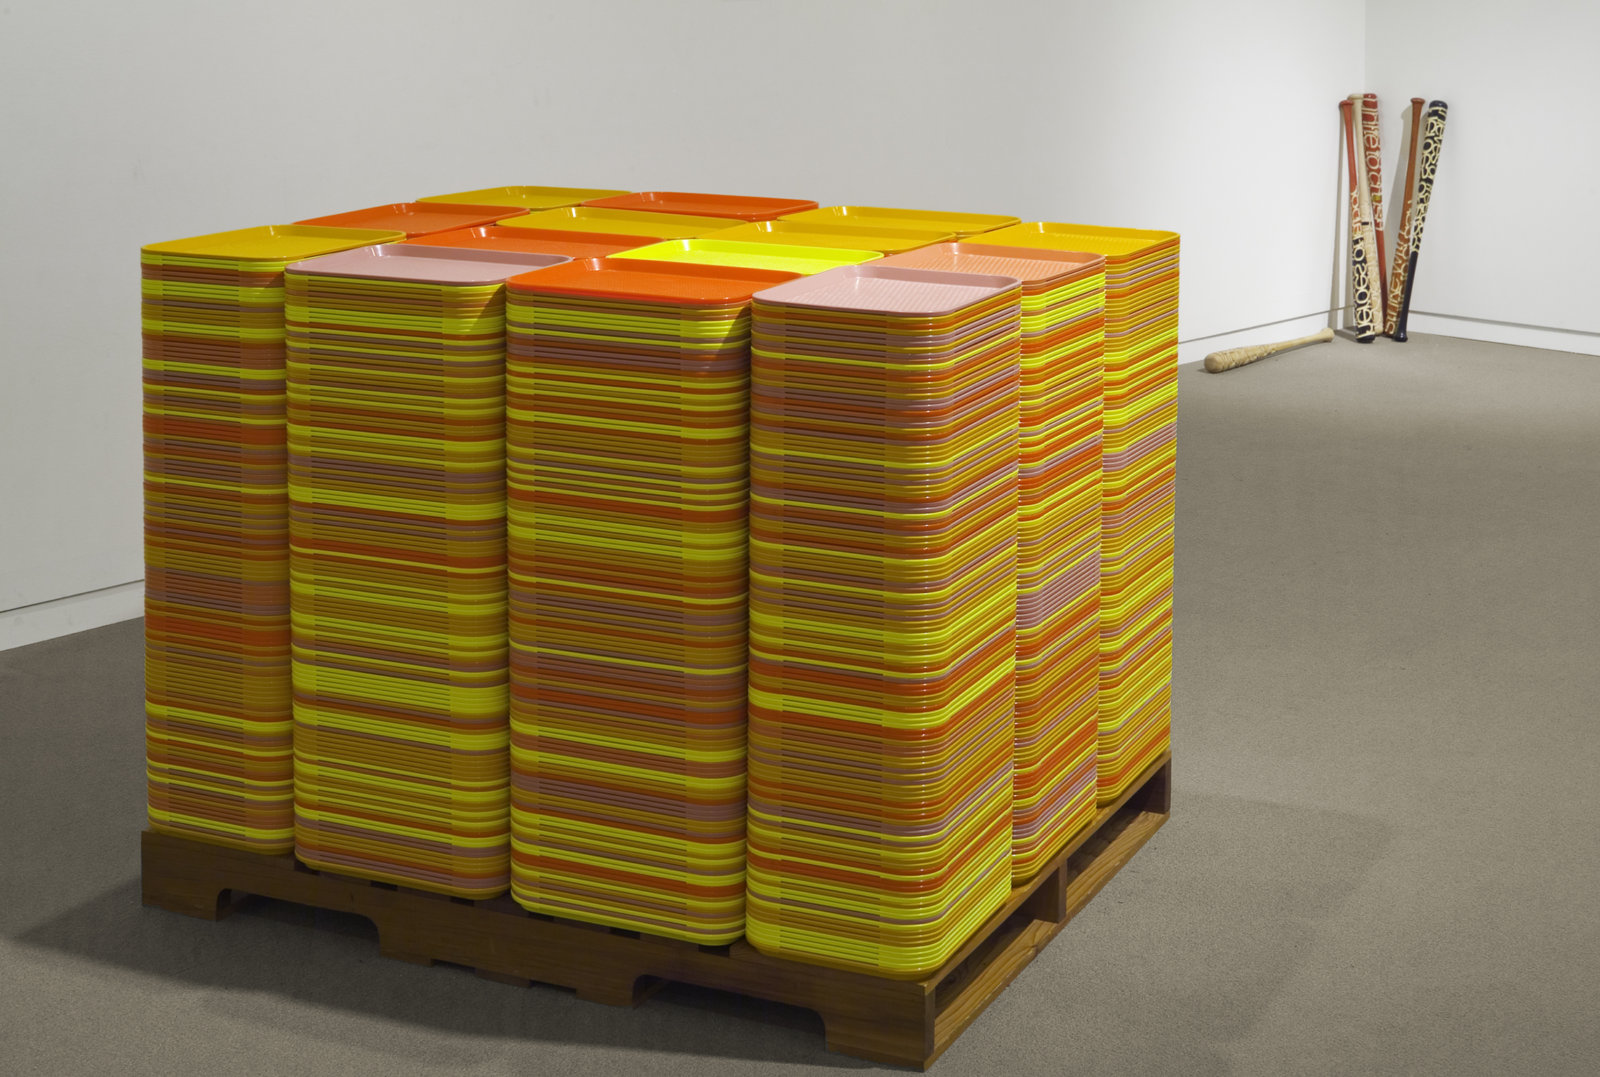 Brian Jungen, Isolated Depiction of the Passage of Time, 2001, plastic food trays, television monitor, VCR, wood, 44 x 46 x 39 in. (112 x 118 x 100 cm). Installation view, Vancouver Art Gallery, Vancouver, 2006